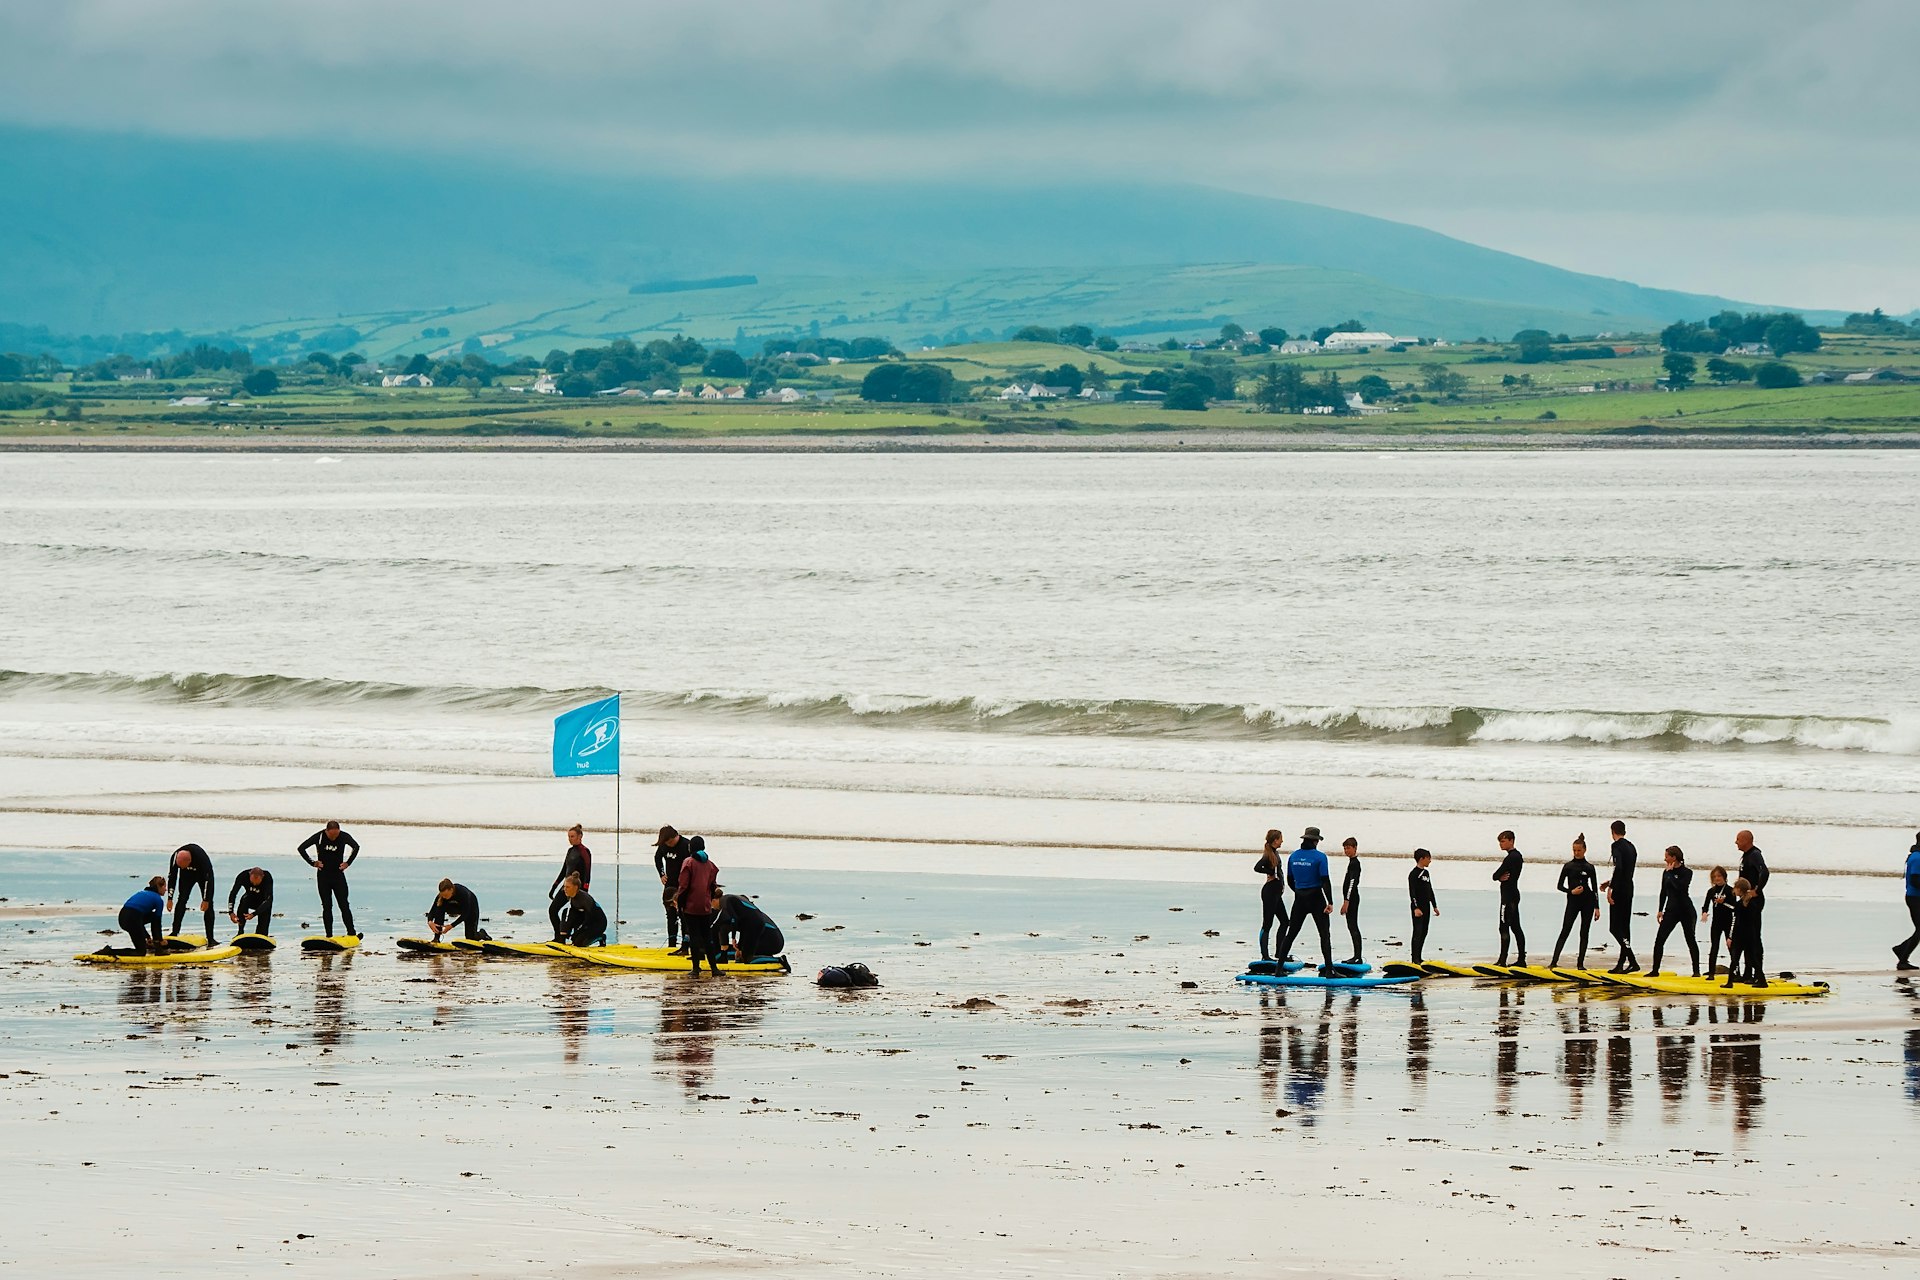 Two groups of teenagers having a surfing lesson on Strandhill Beach in County Sligo